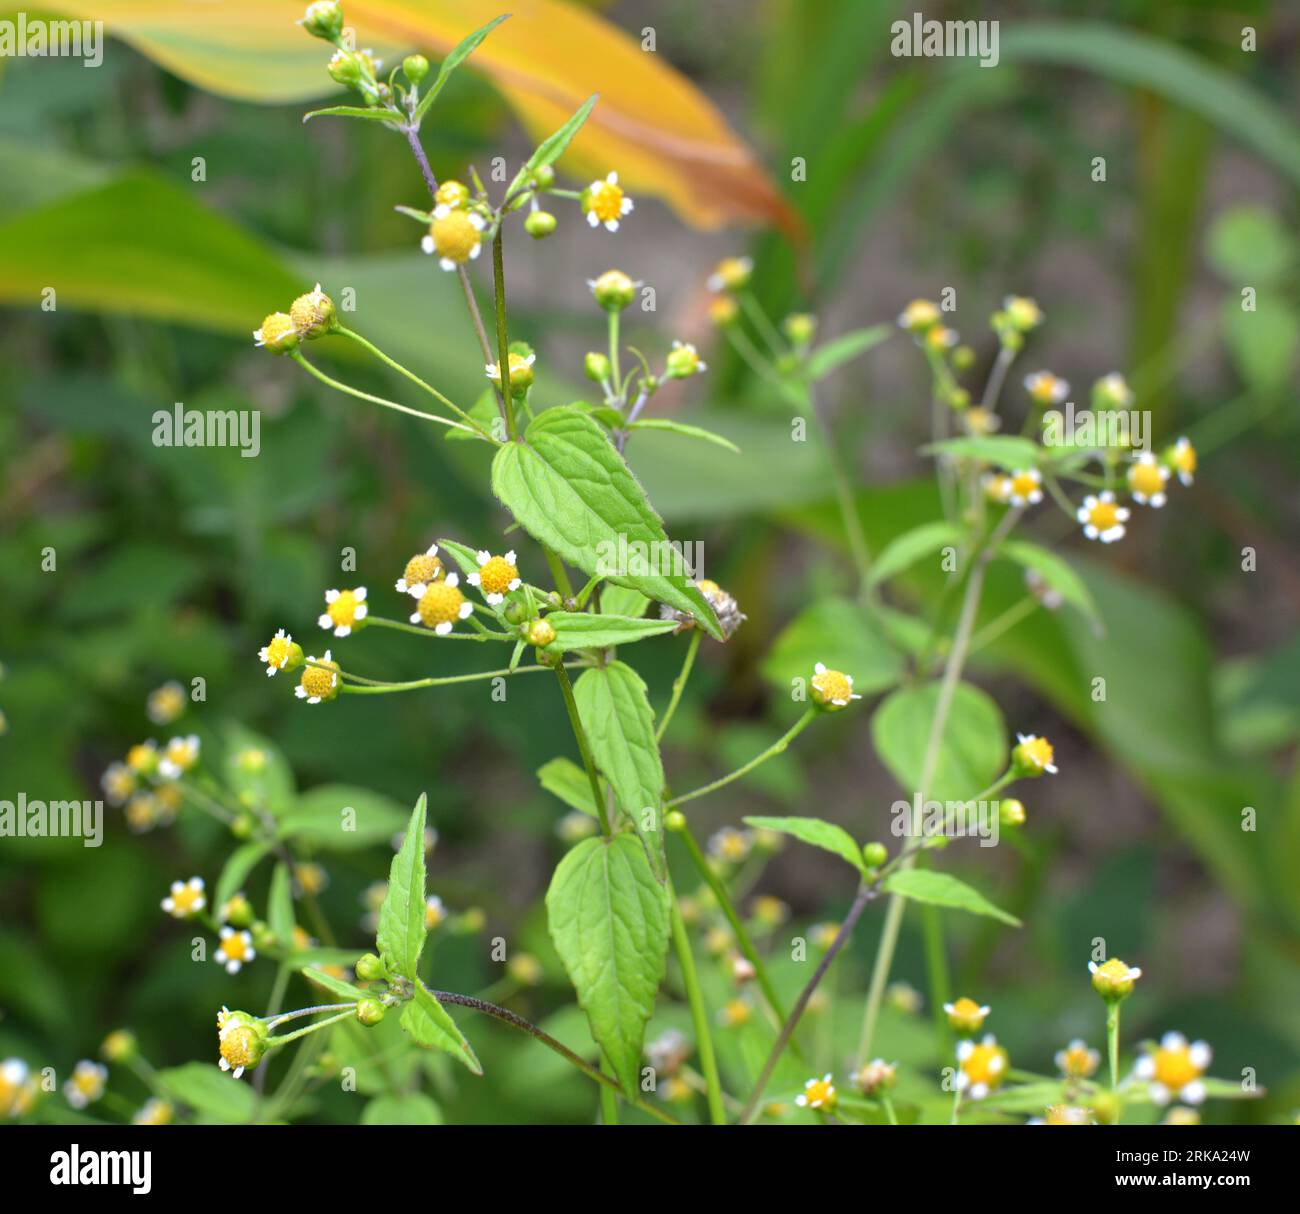 One of the weed species blooms in the field - galinsoga parviflora Stock Photo